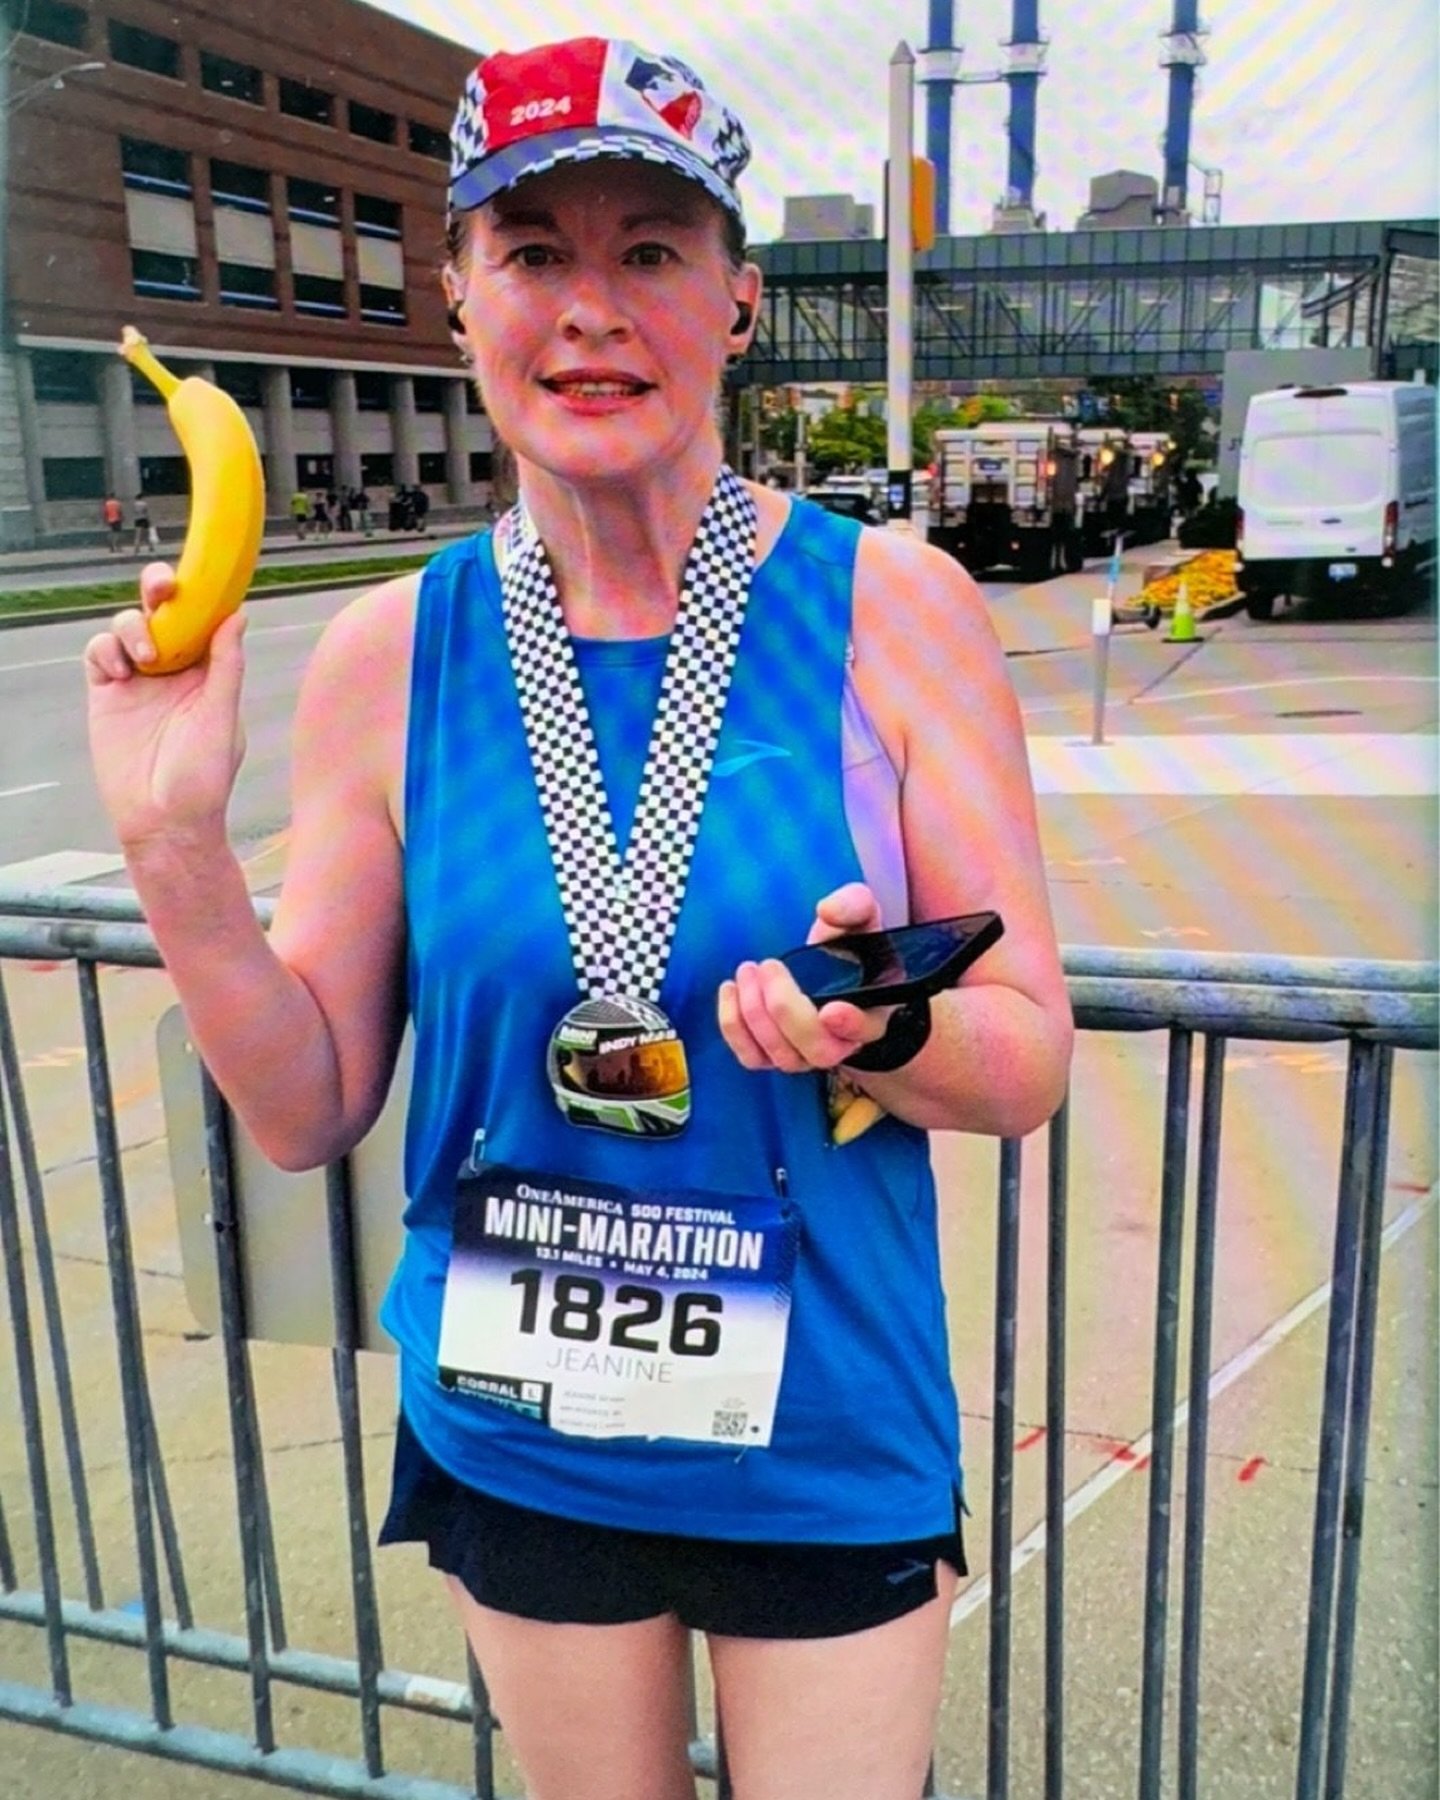 Join me in celebrating Jeanine! 🎉🥳👏🎊

This morning, Jeanine ran the One America Indi Mini Marathon! She absolutely crushed this race and came in 20 minutes faster than she did last year! Best of all, she had no pain and felt great throughout trai